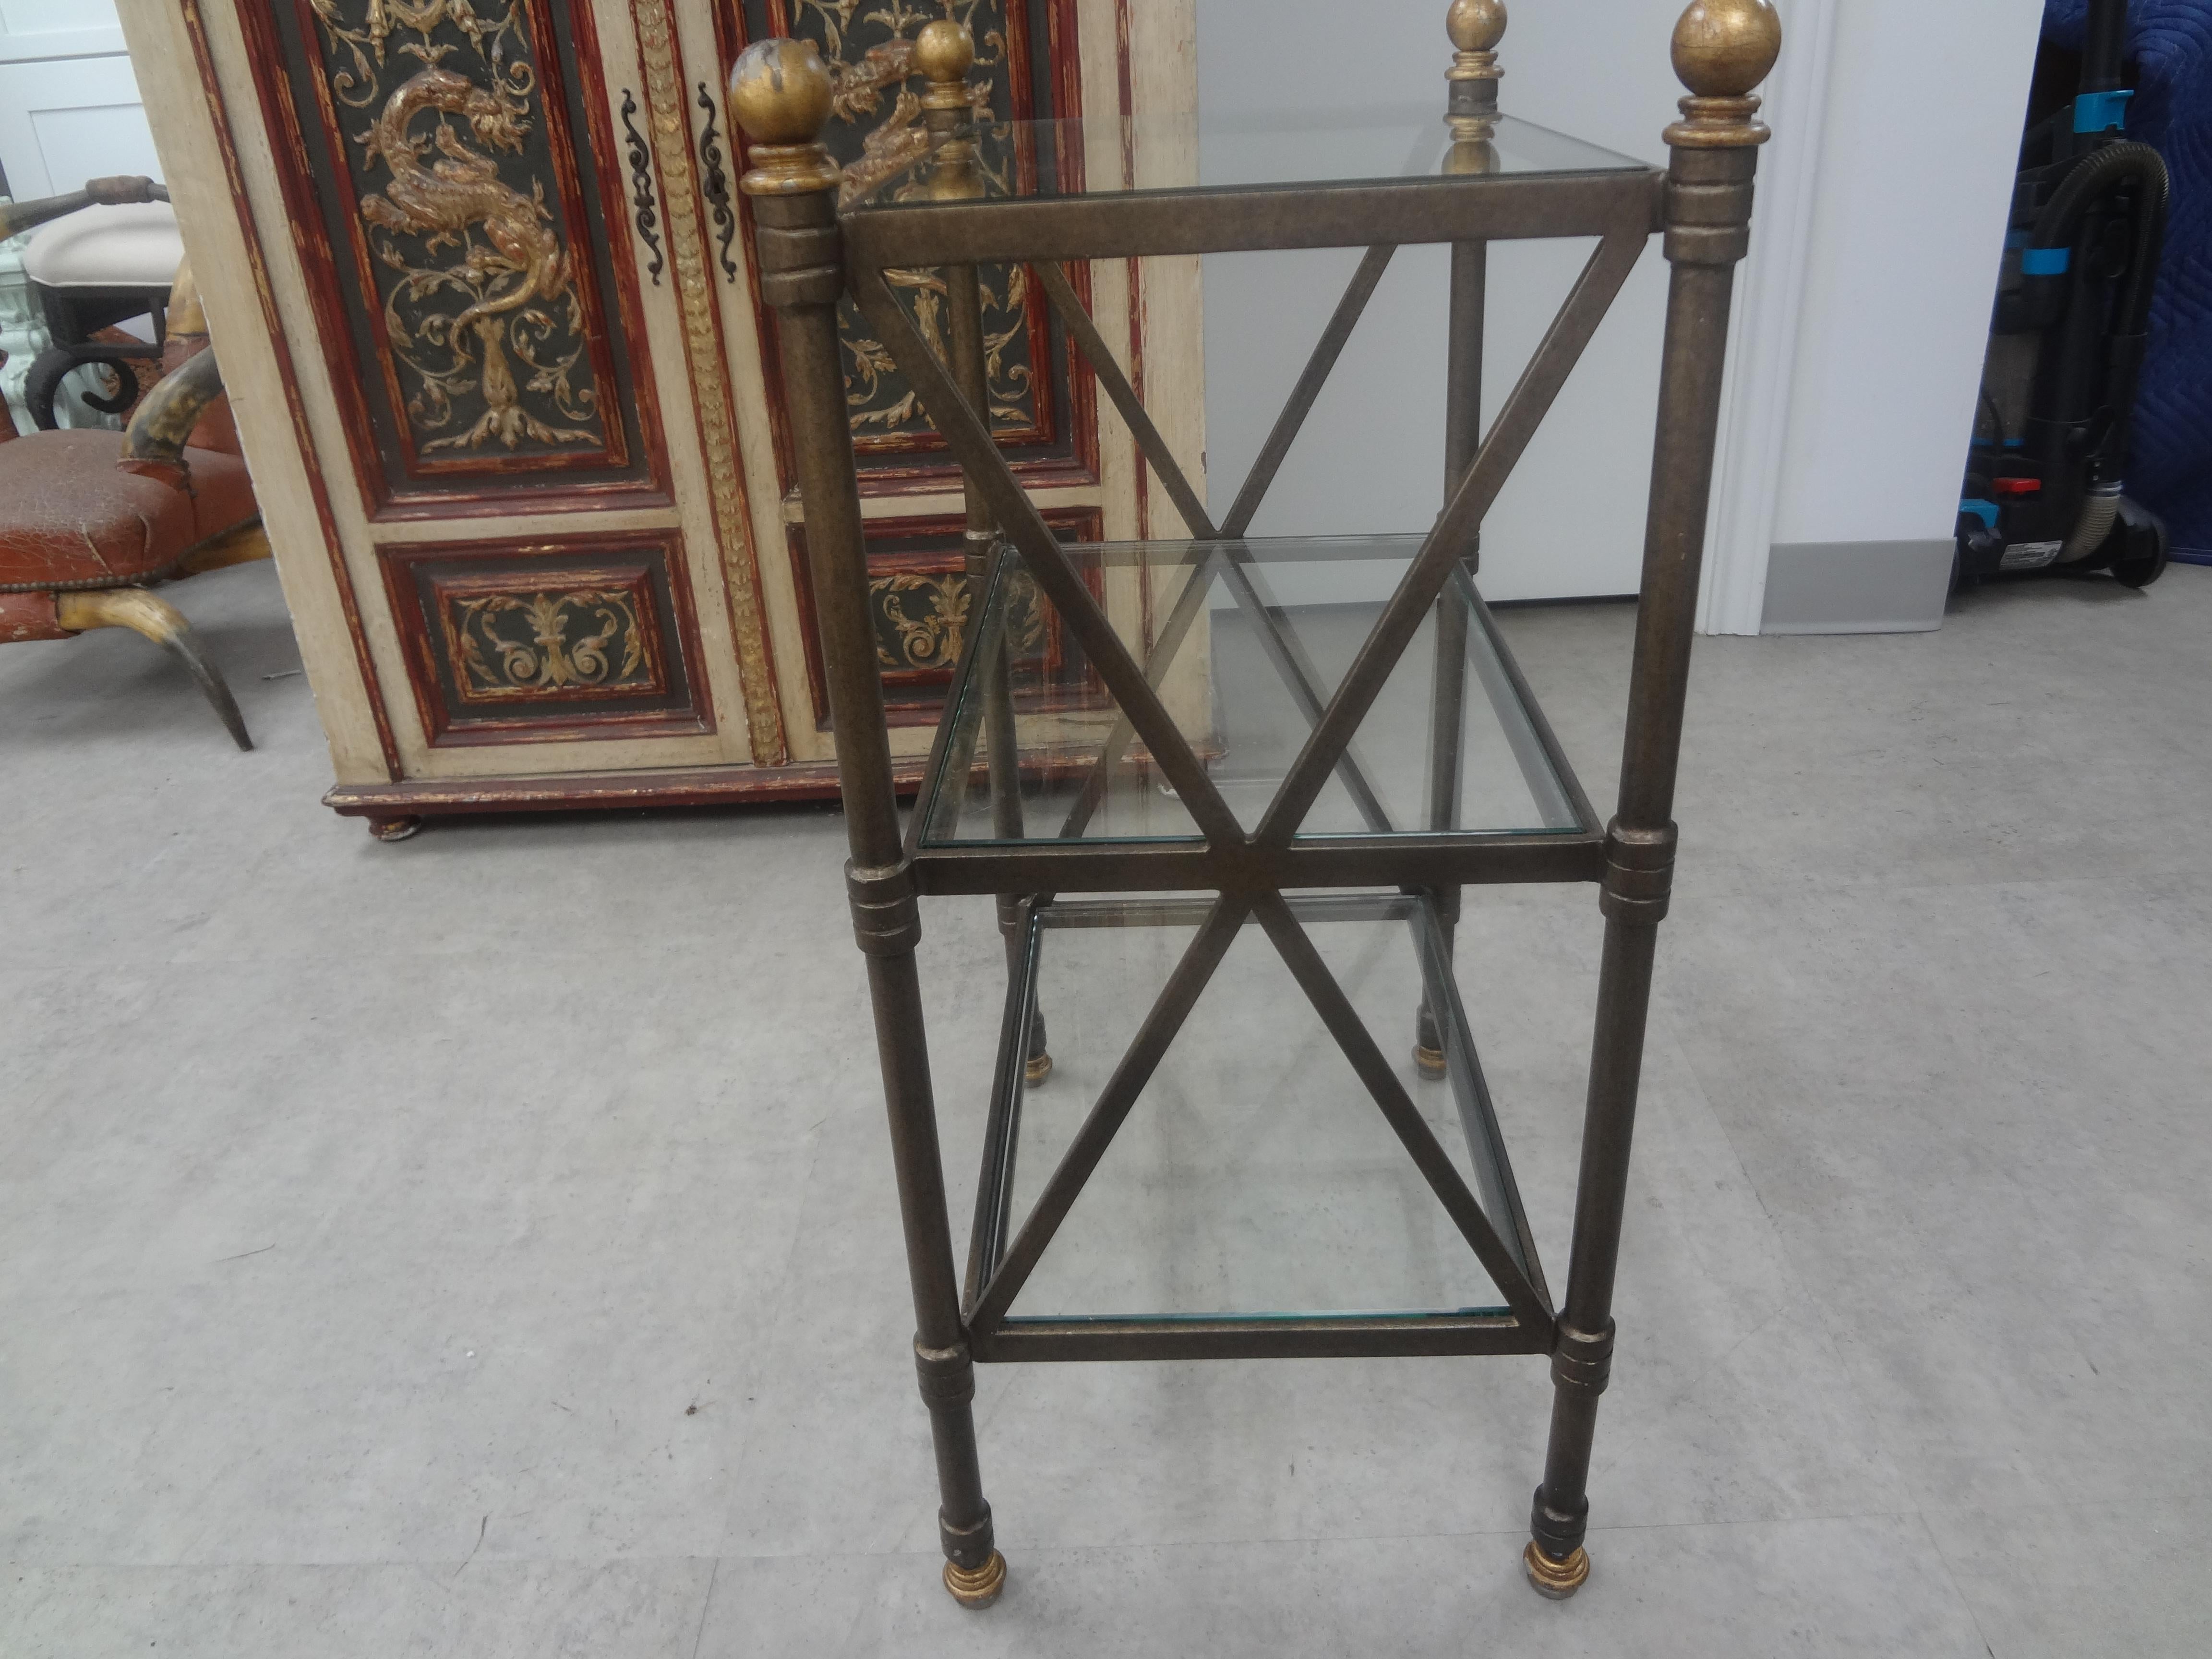 Vintage French Neoclassical Style Bronzed Iron Table In Good Condition For Sale In Houston, TX